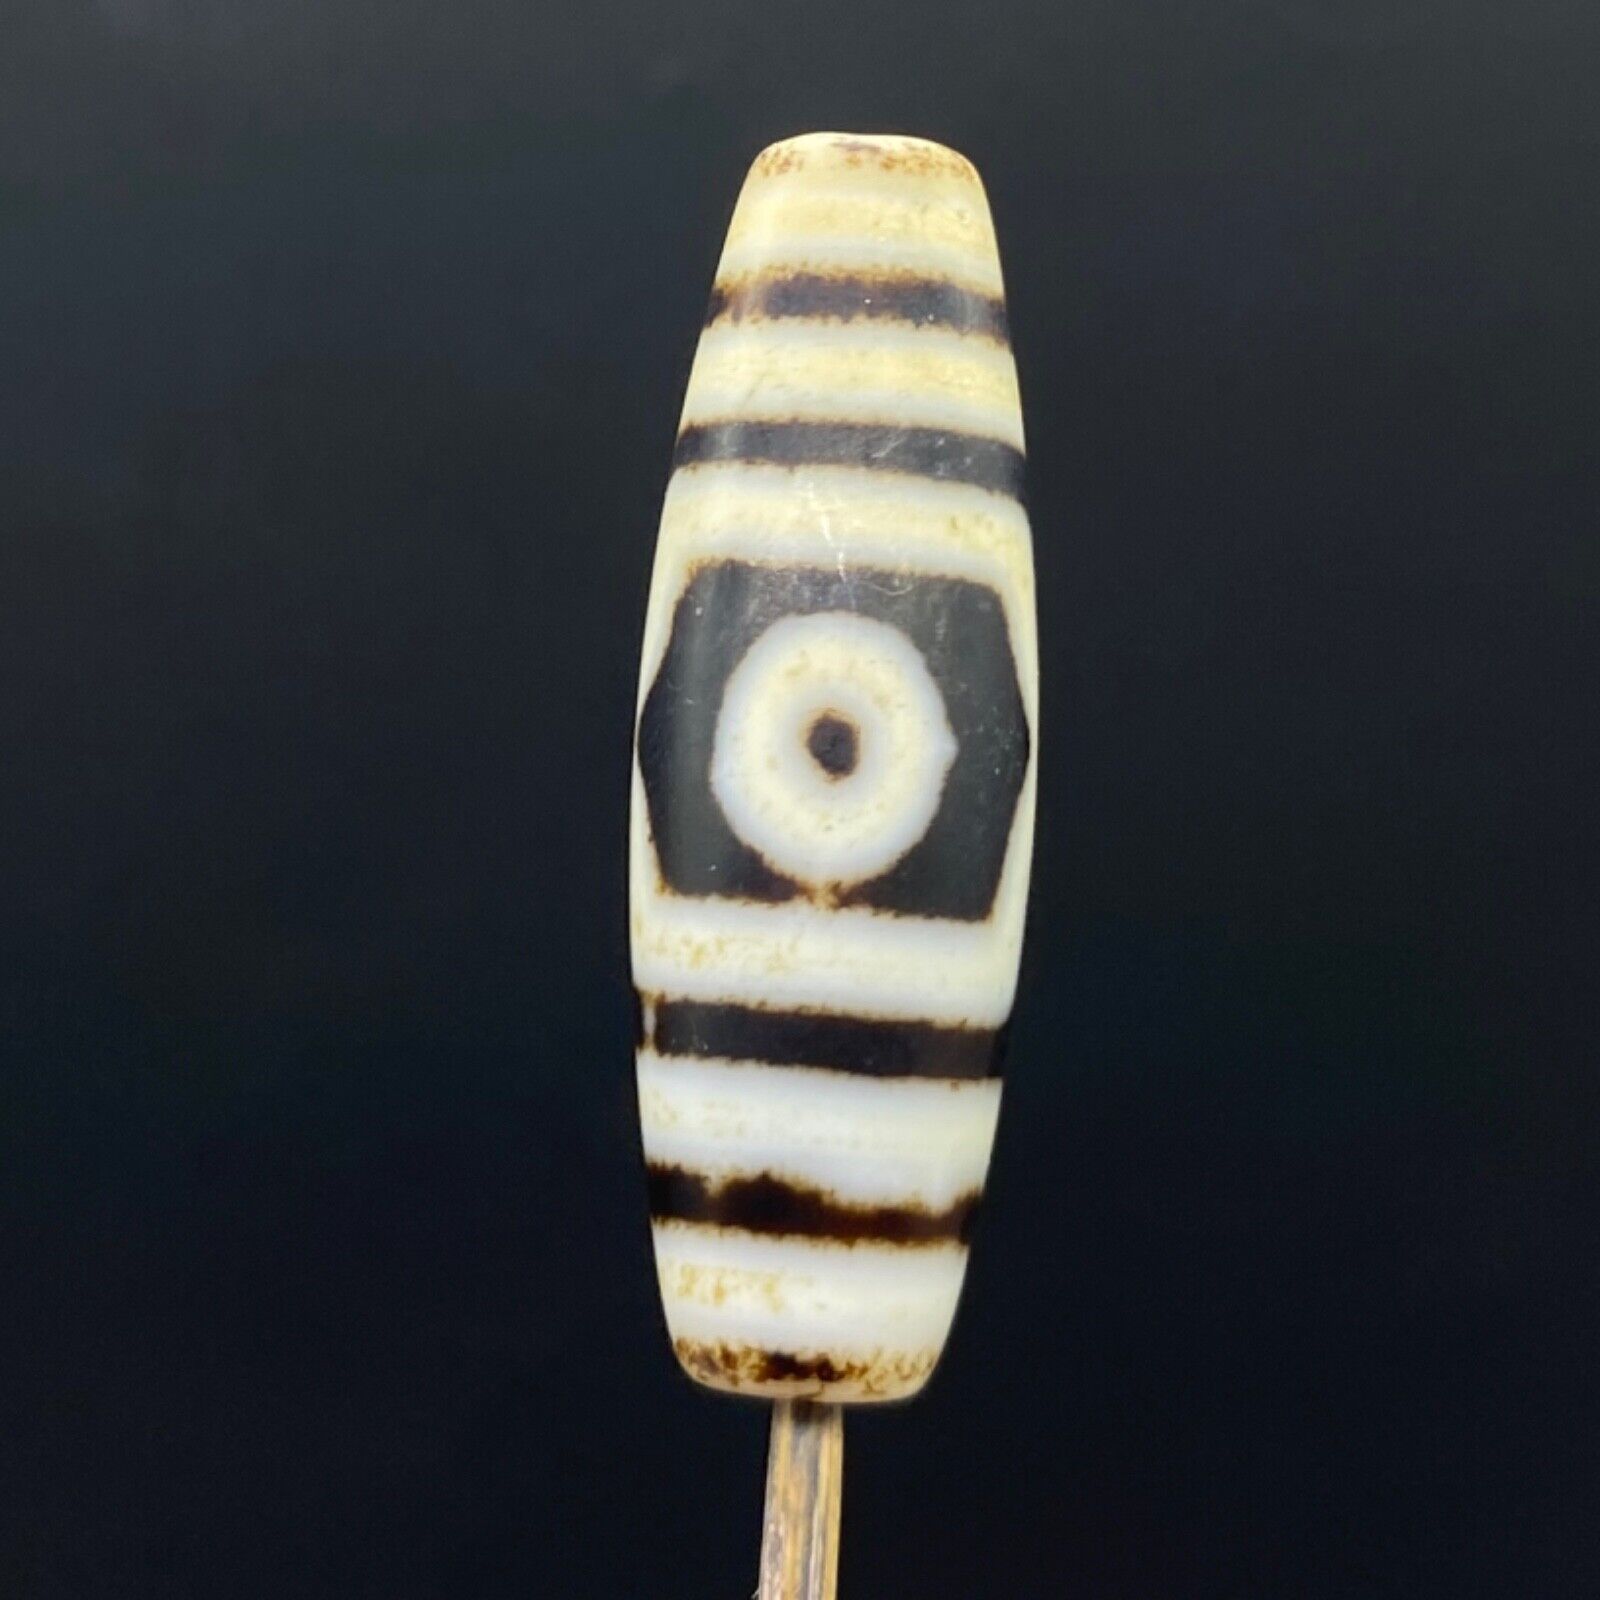 UNIQUE GENUINE NATURAL ANCIENT TIEBTAN AGATE OLD DZI BEAD WITH EYES